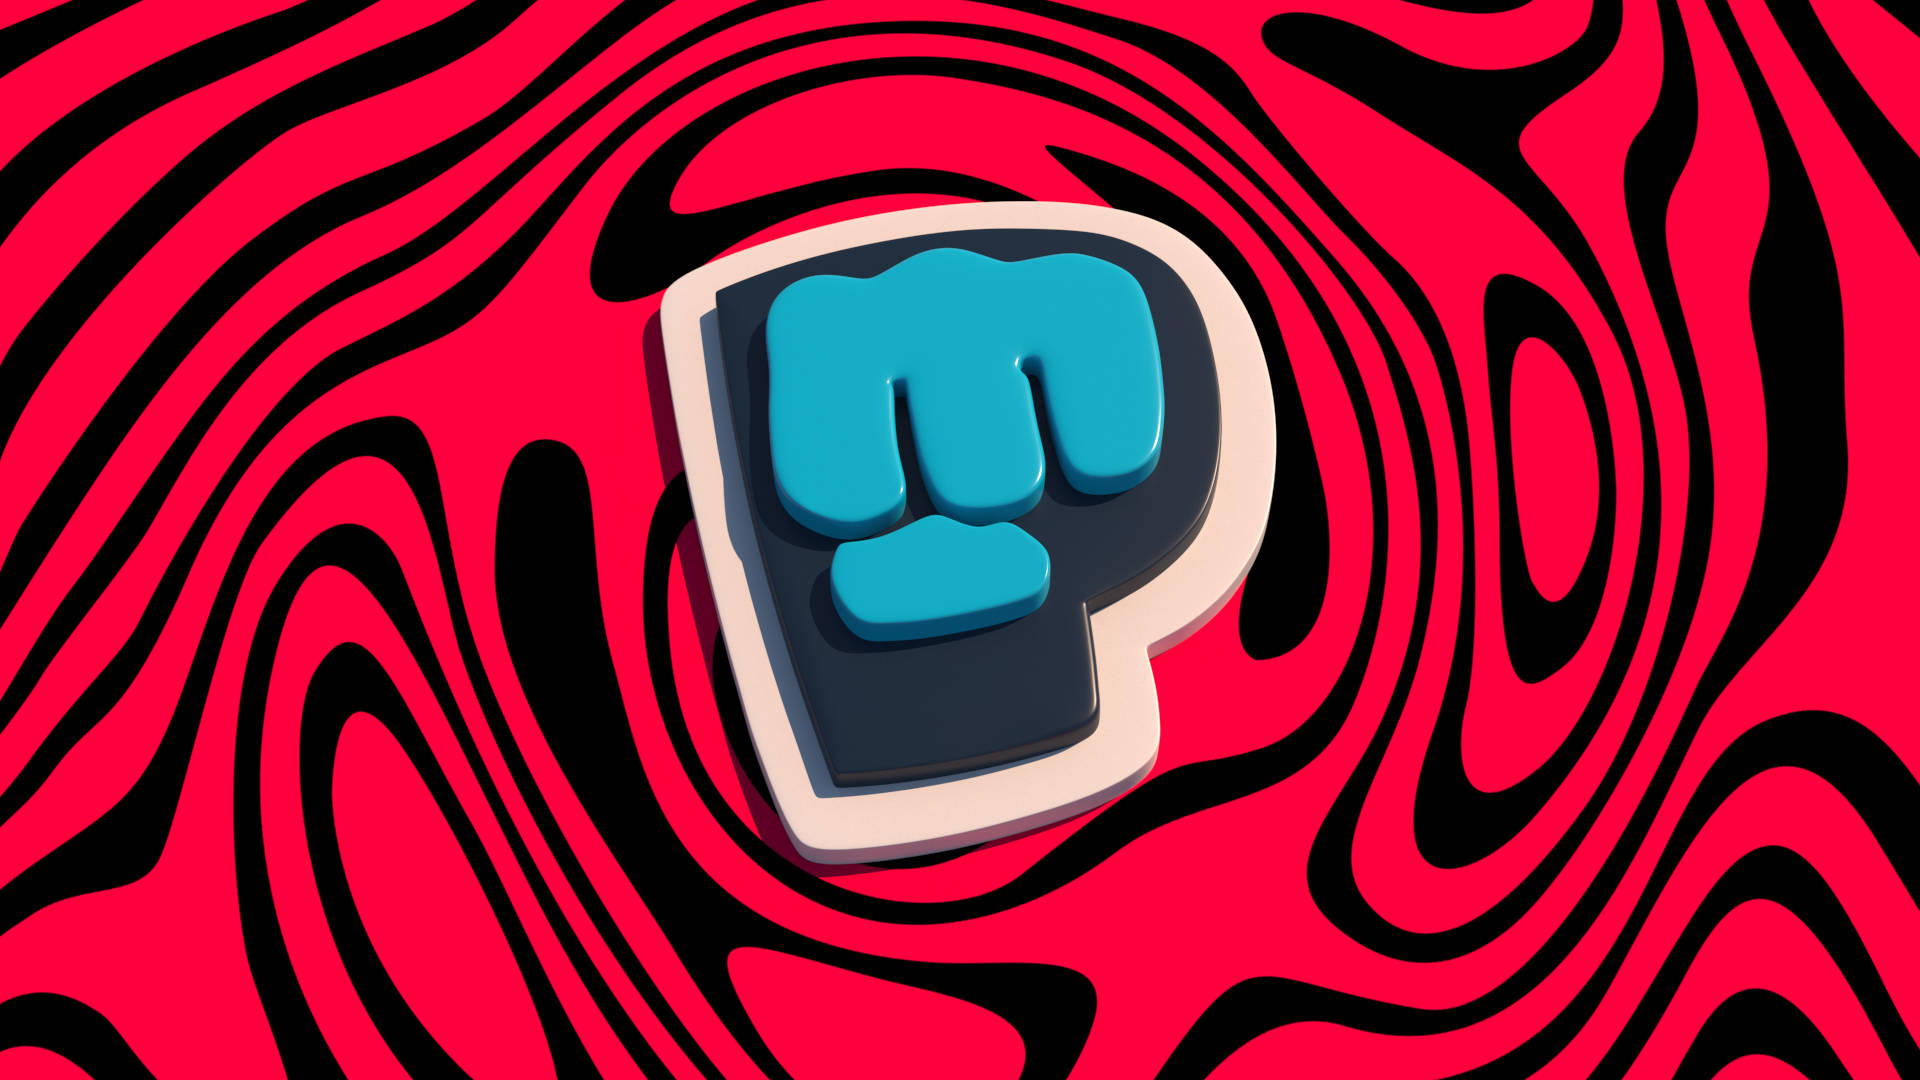 Show your love for @Pewdiepie with 3D Brofist! Wallpaper